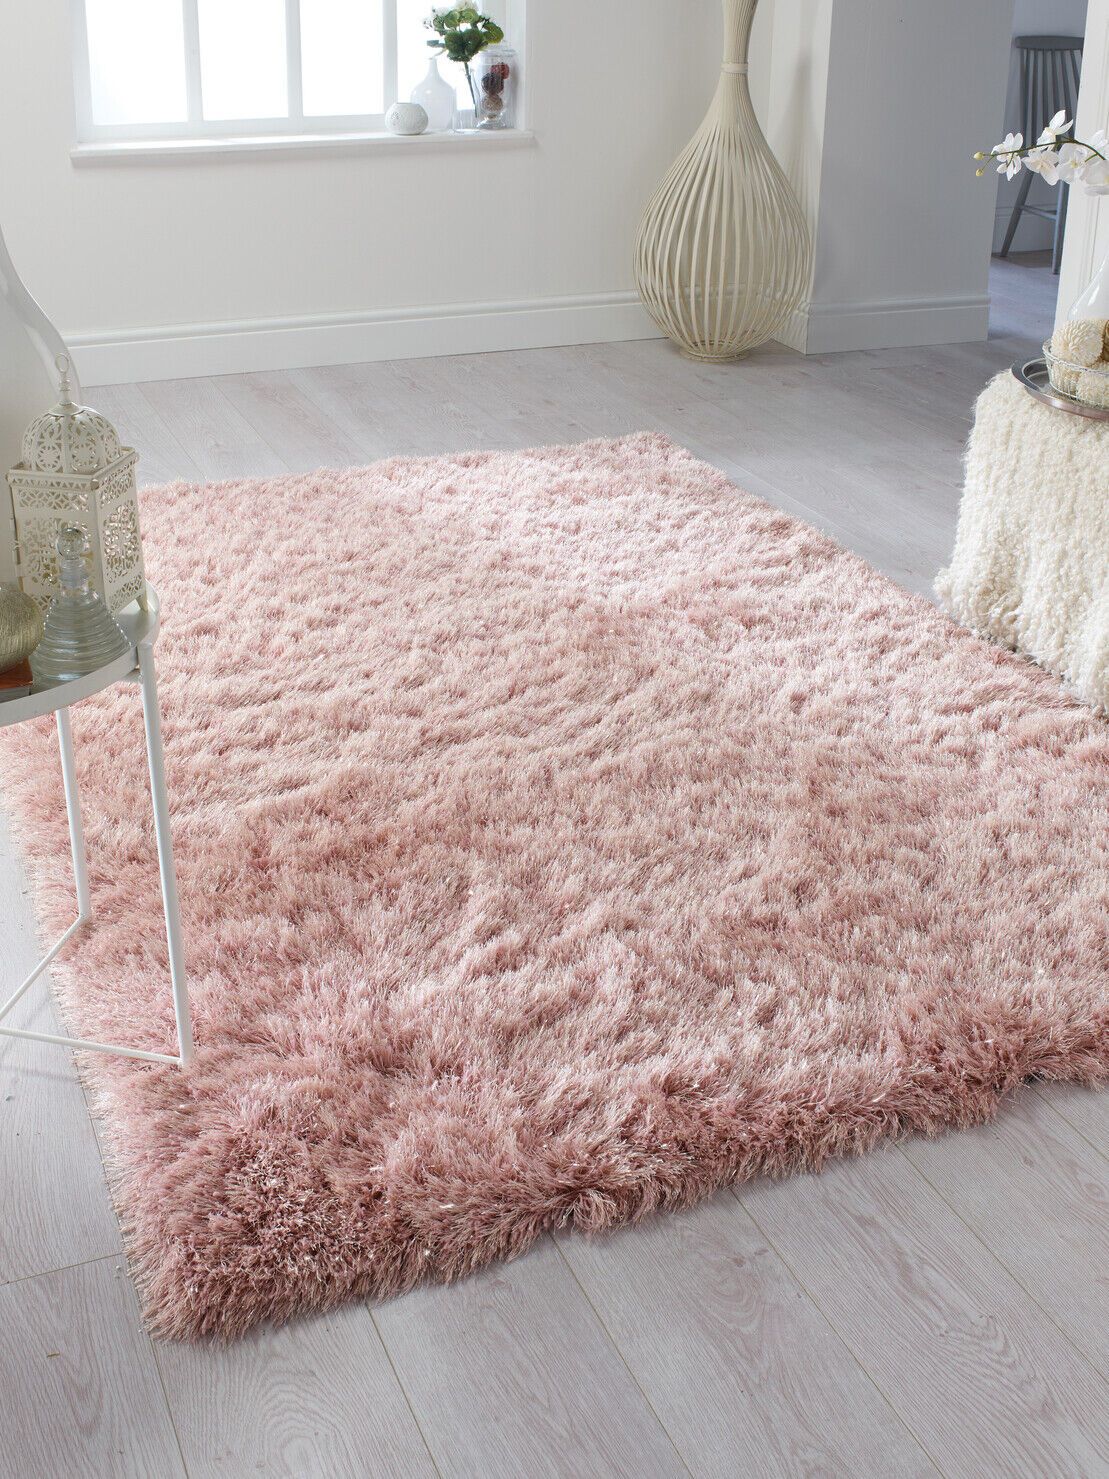 Dazzle Soft Fluffy Silky Shaggy Blush Pink Rug Bedroom Living Room Carpet |  Ebay Inside Pink Soft Touch Shag Rugs (Photo 11 of 15)